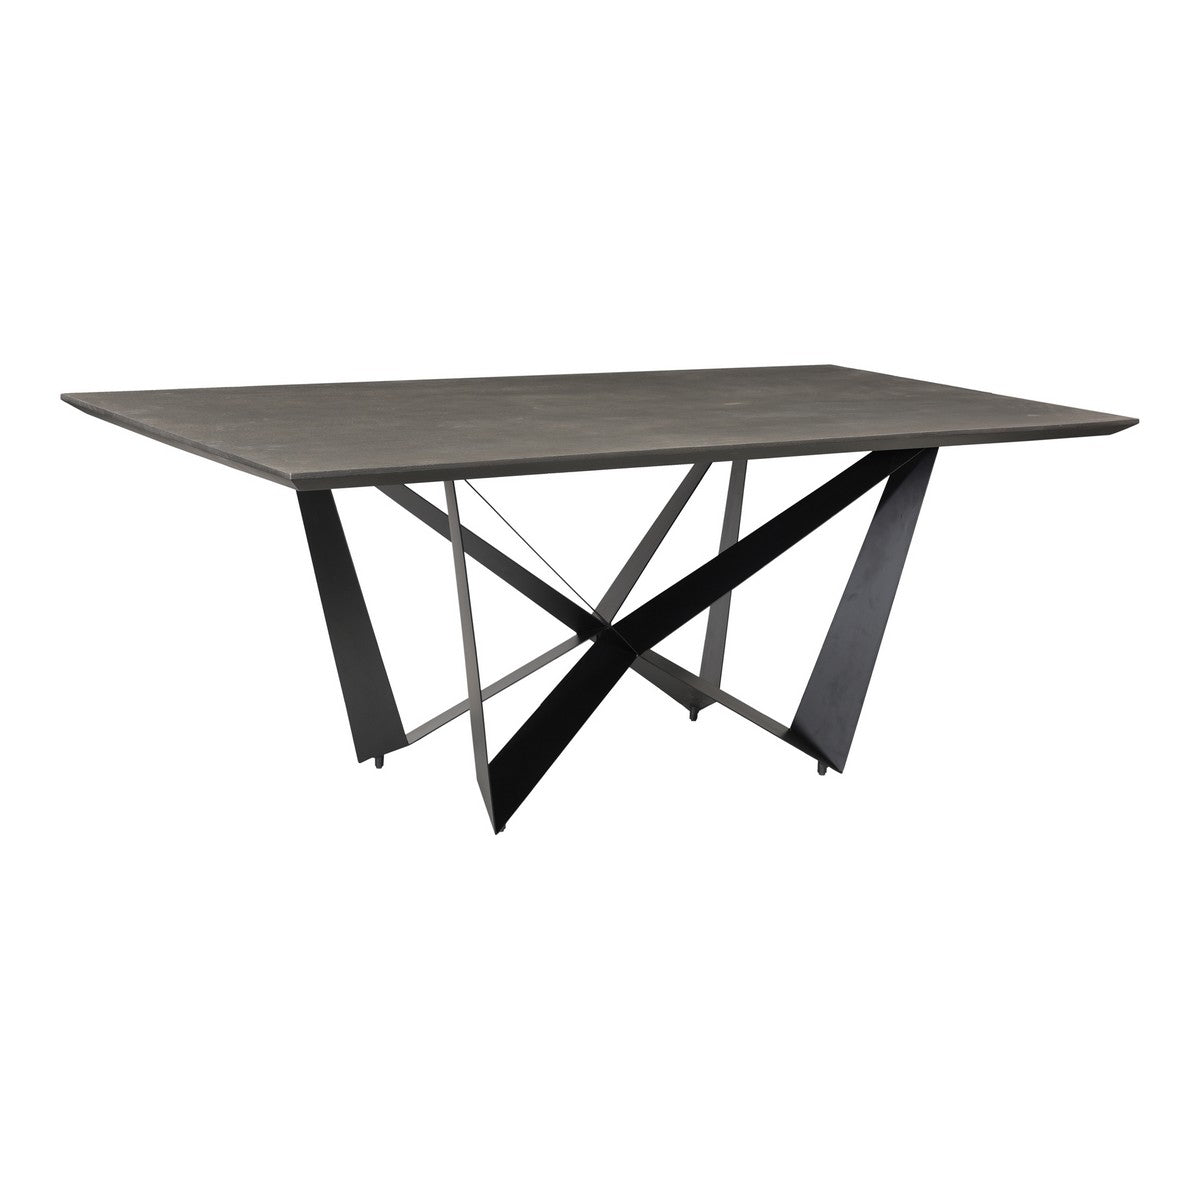 Moe's Home Collection Brolio Dining Table Charcoal - RP-1007-07